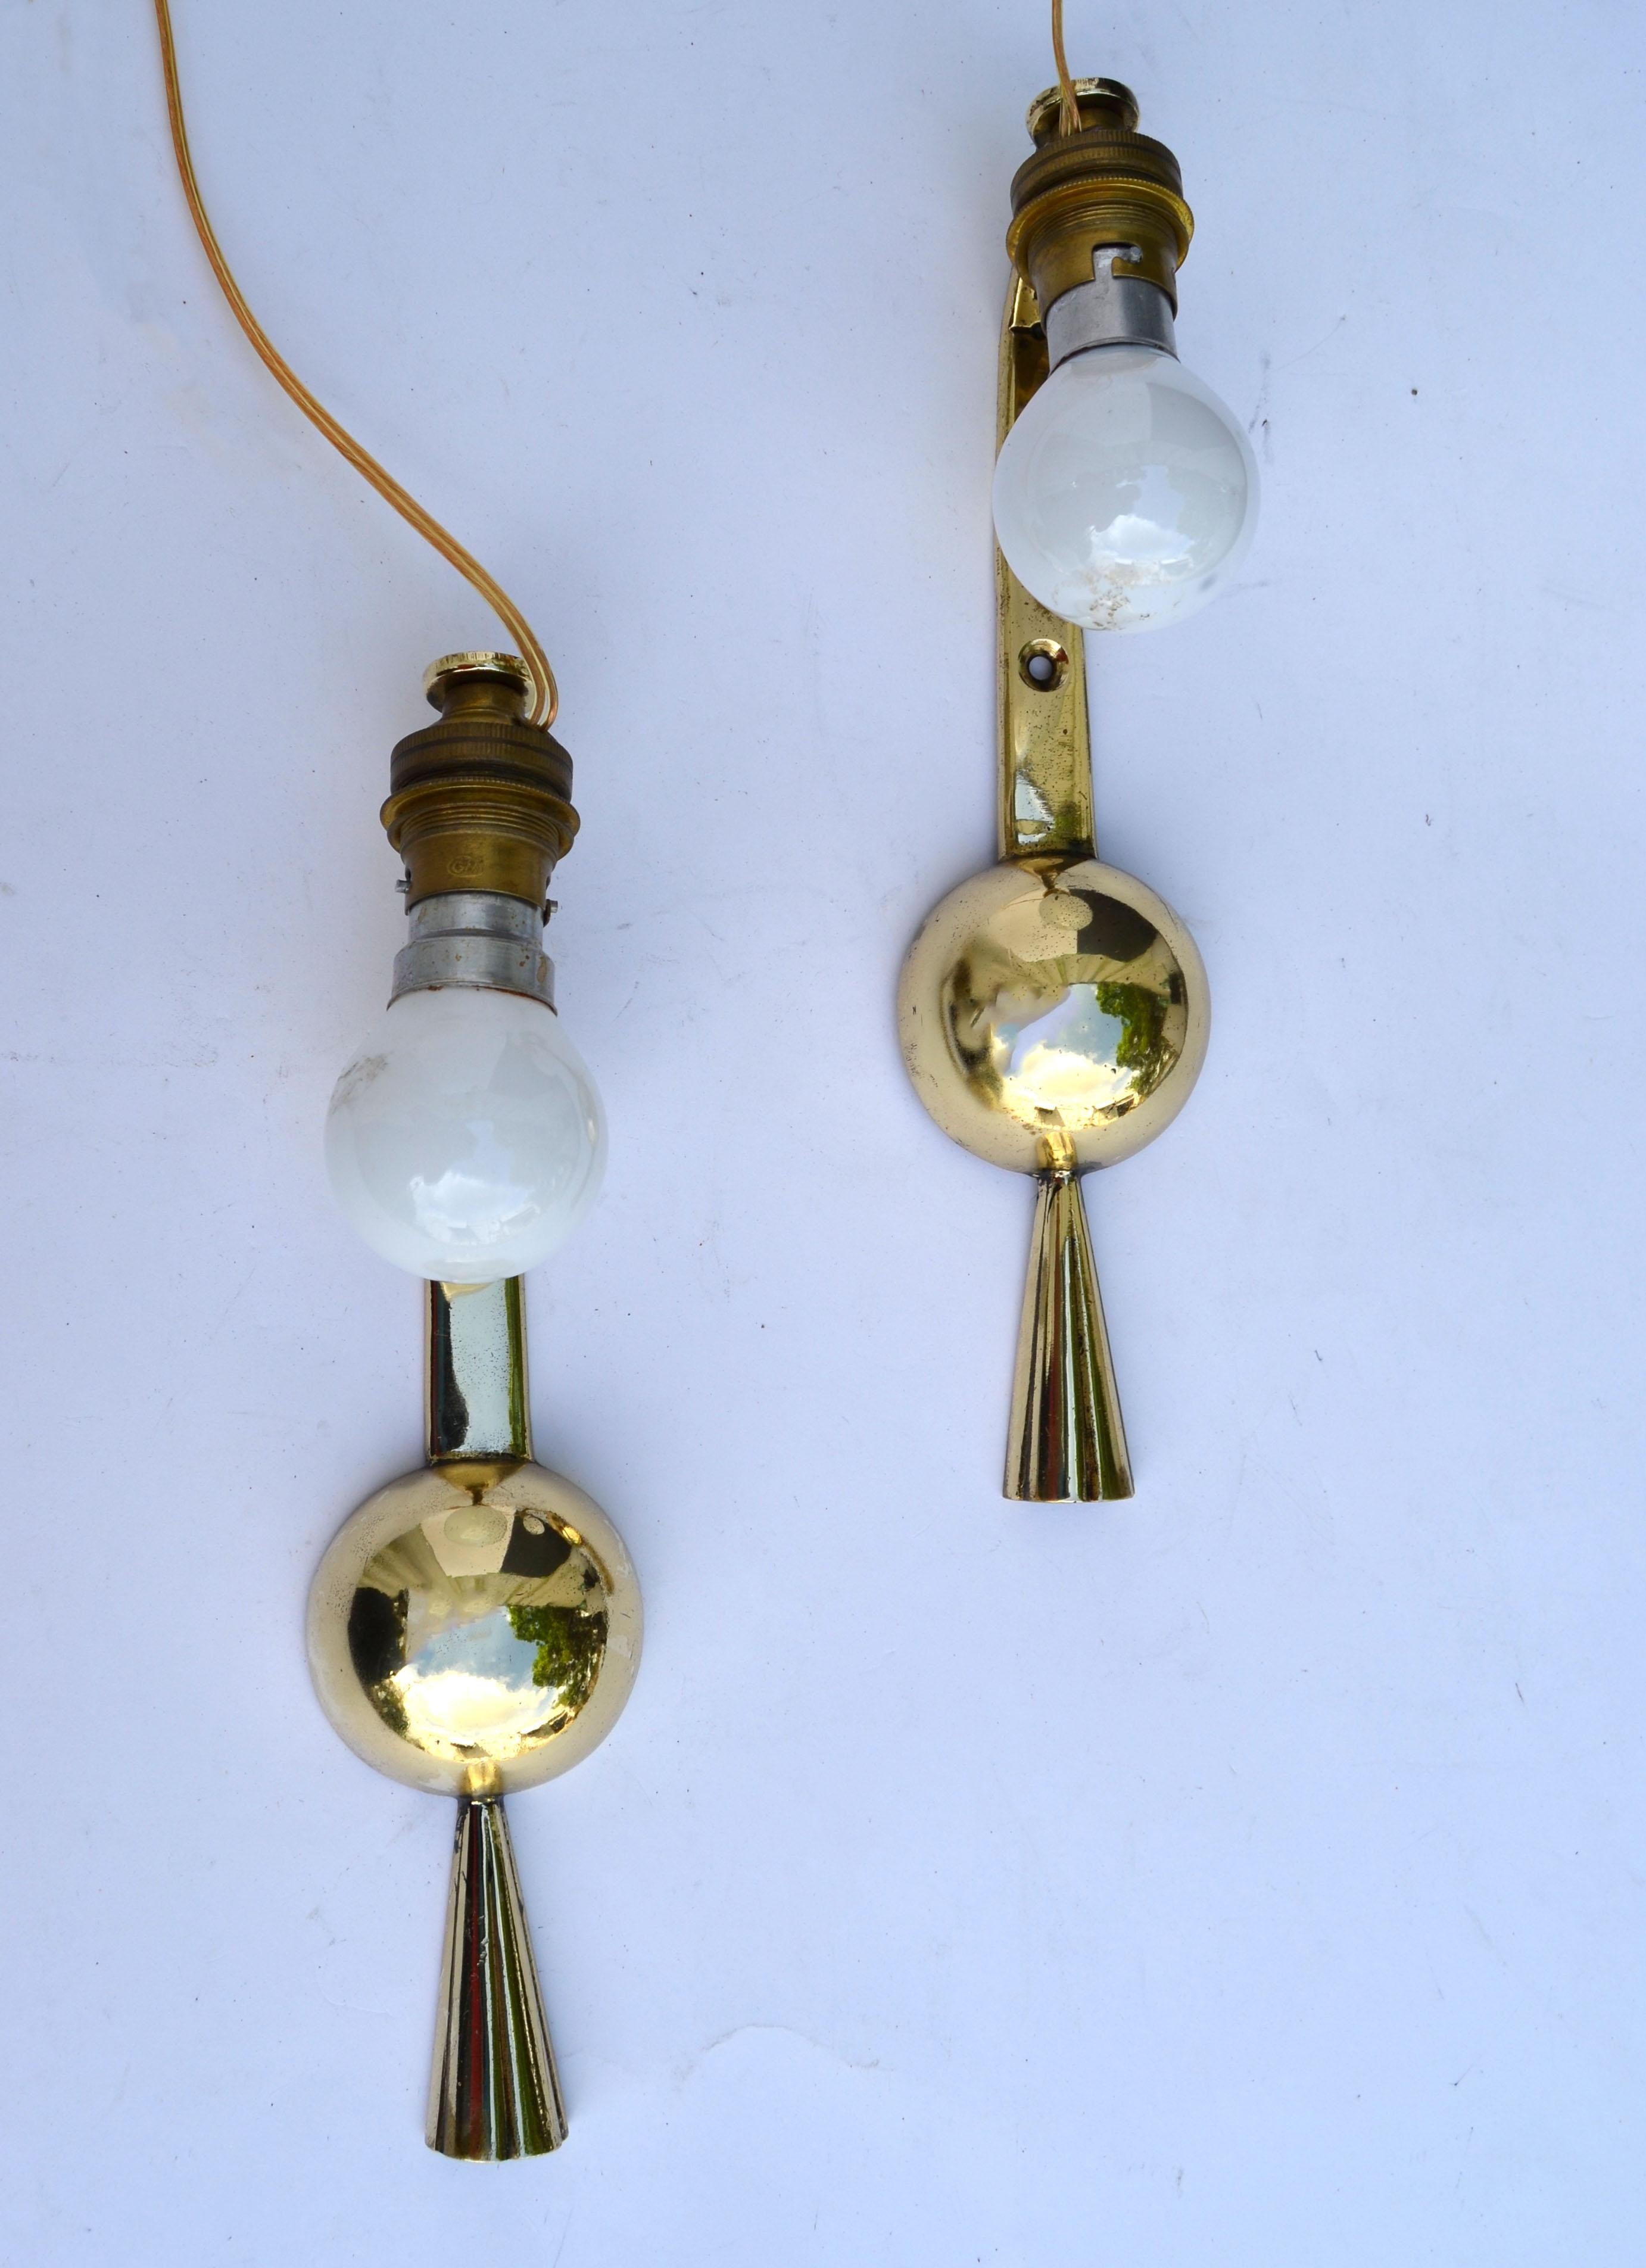 Polished Signed Marcel Guillemard Bronze Sconces Wall Lamps France Neoclassical, Pair For Sale